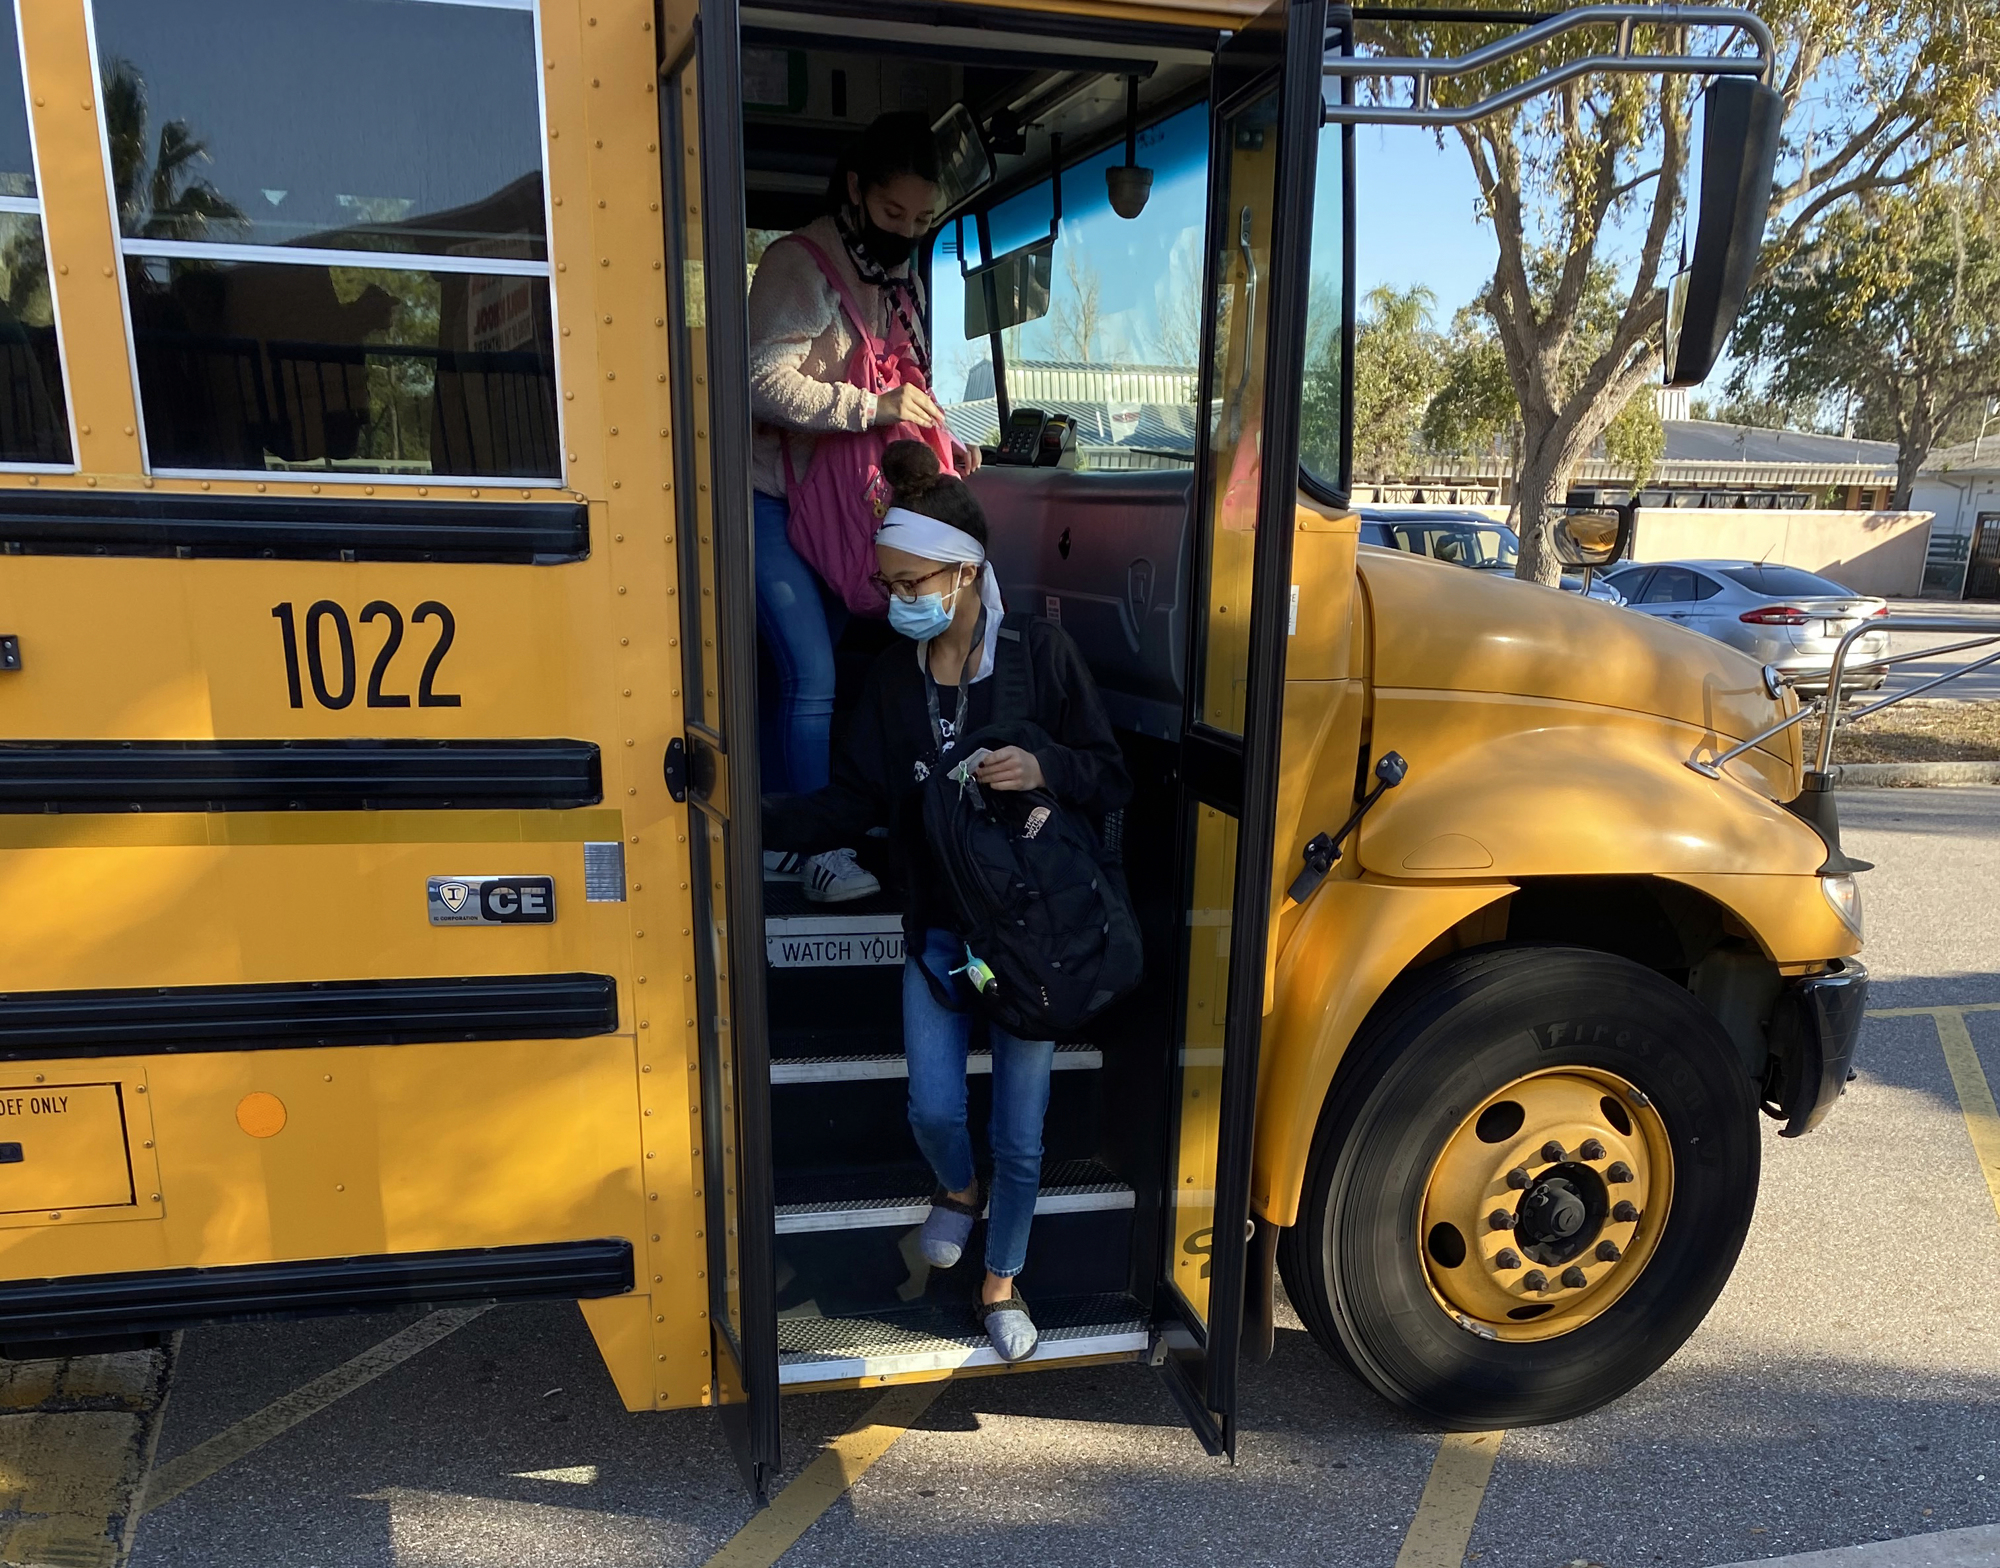 Braden River Middle School students head inside to start their day after taking the bus to school. The School District of Manatee County has 205 buses in its fleet and could be adding an electric bus. Courtesy photo.